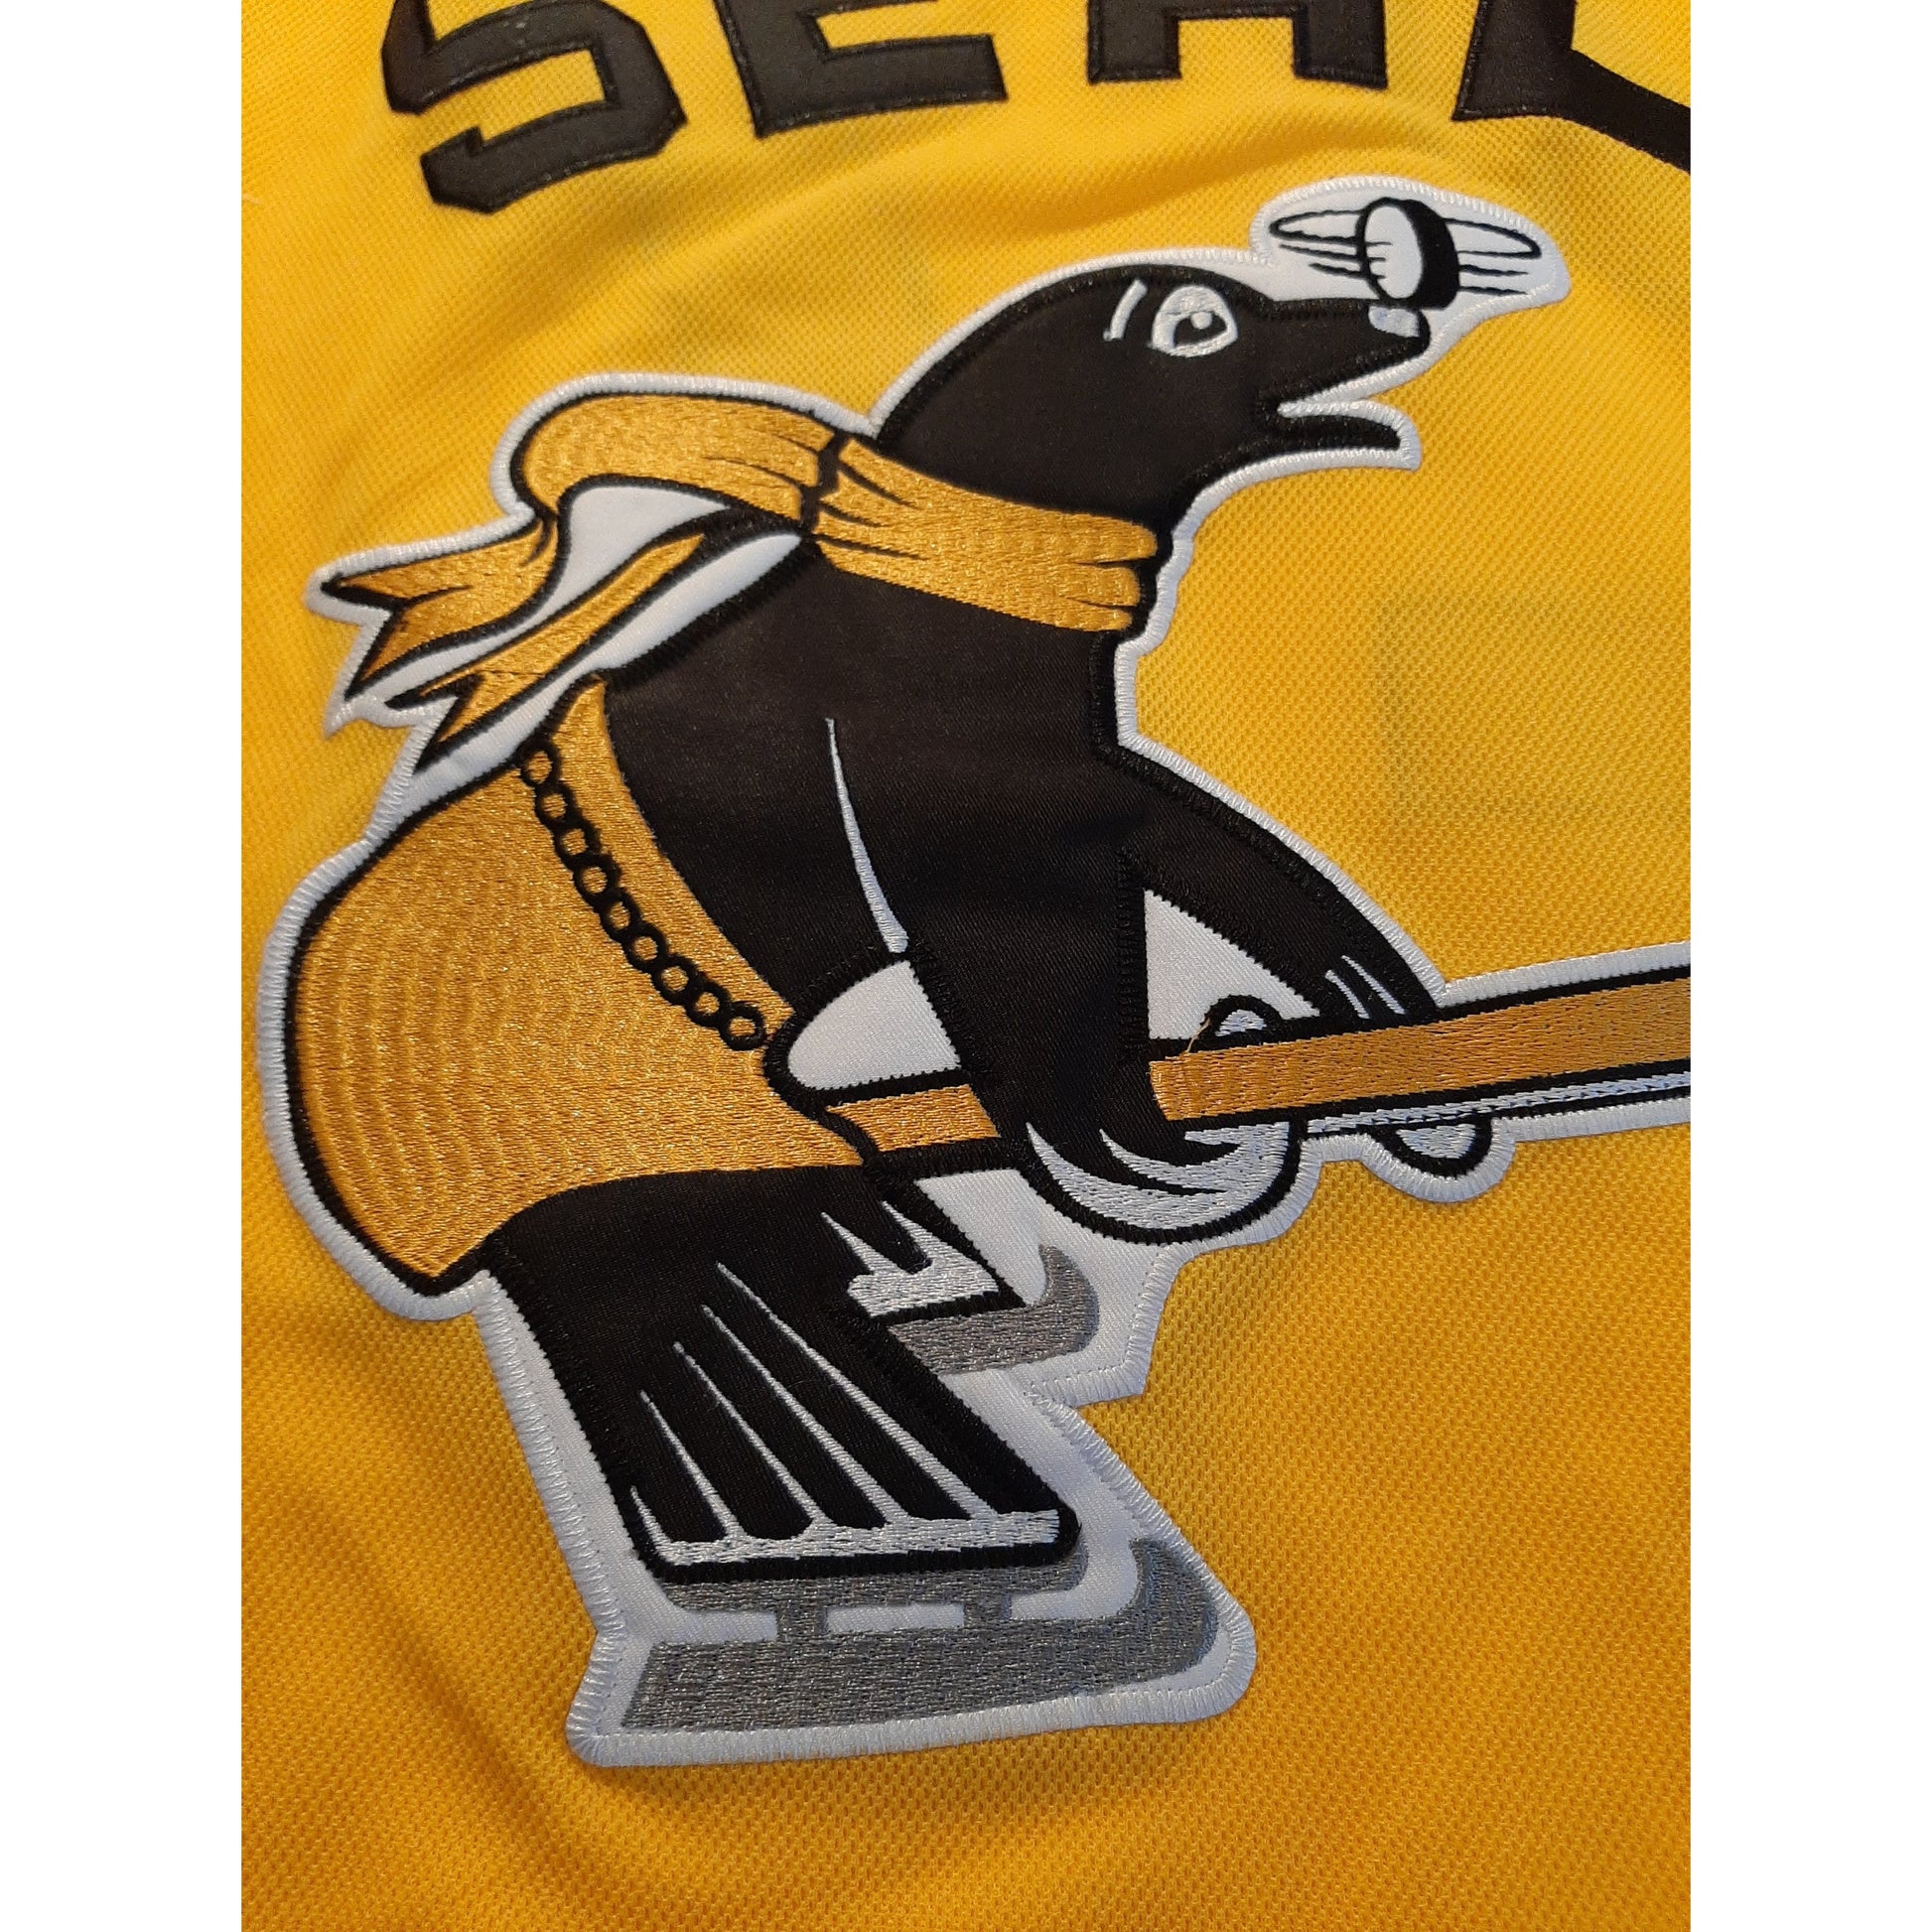 Best Selling Product] Personalize Name and Number San Francisco Seals  Yellow Hockey jersey WHL1661 1966 Full Printed Shirt